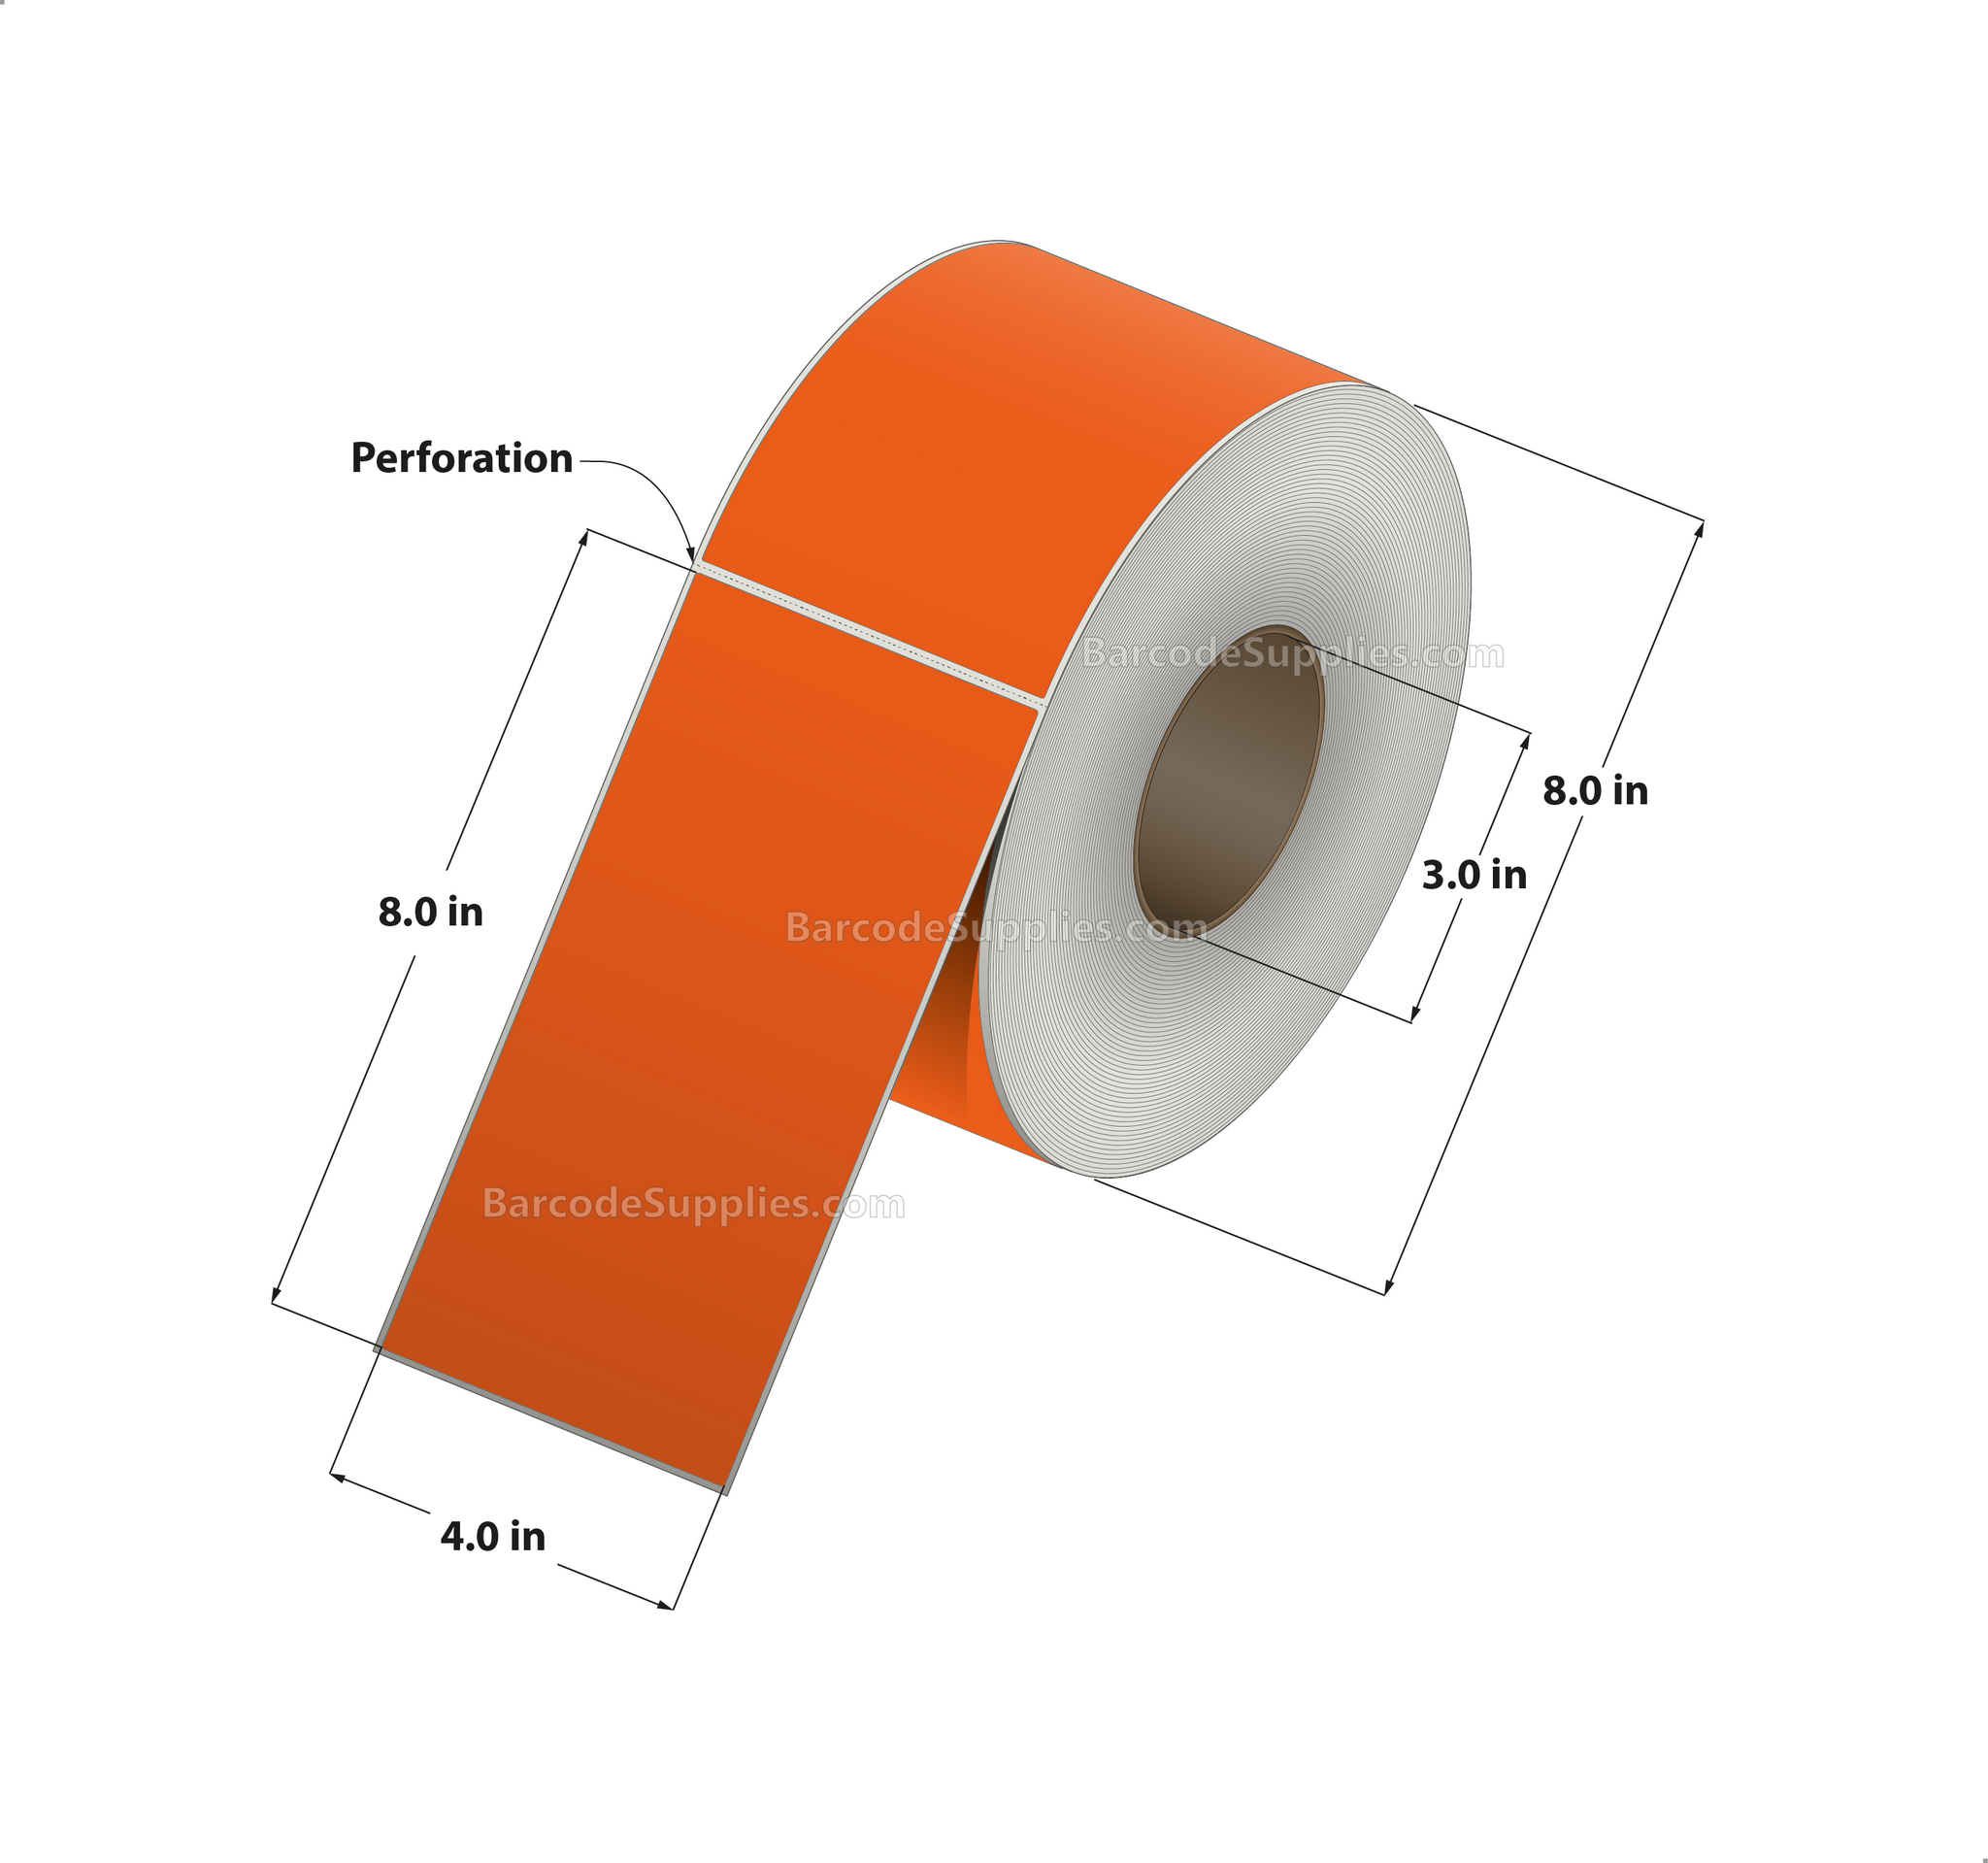 4 x 8 Thermal Transfer 1495 Orange Labels With Permanent Adhesive - Perforated - 750 Labels Per Roll - Carton Of 4 Rolls - 3000 Labels Total - MPN: RFC-4-8-750-OR